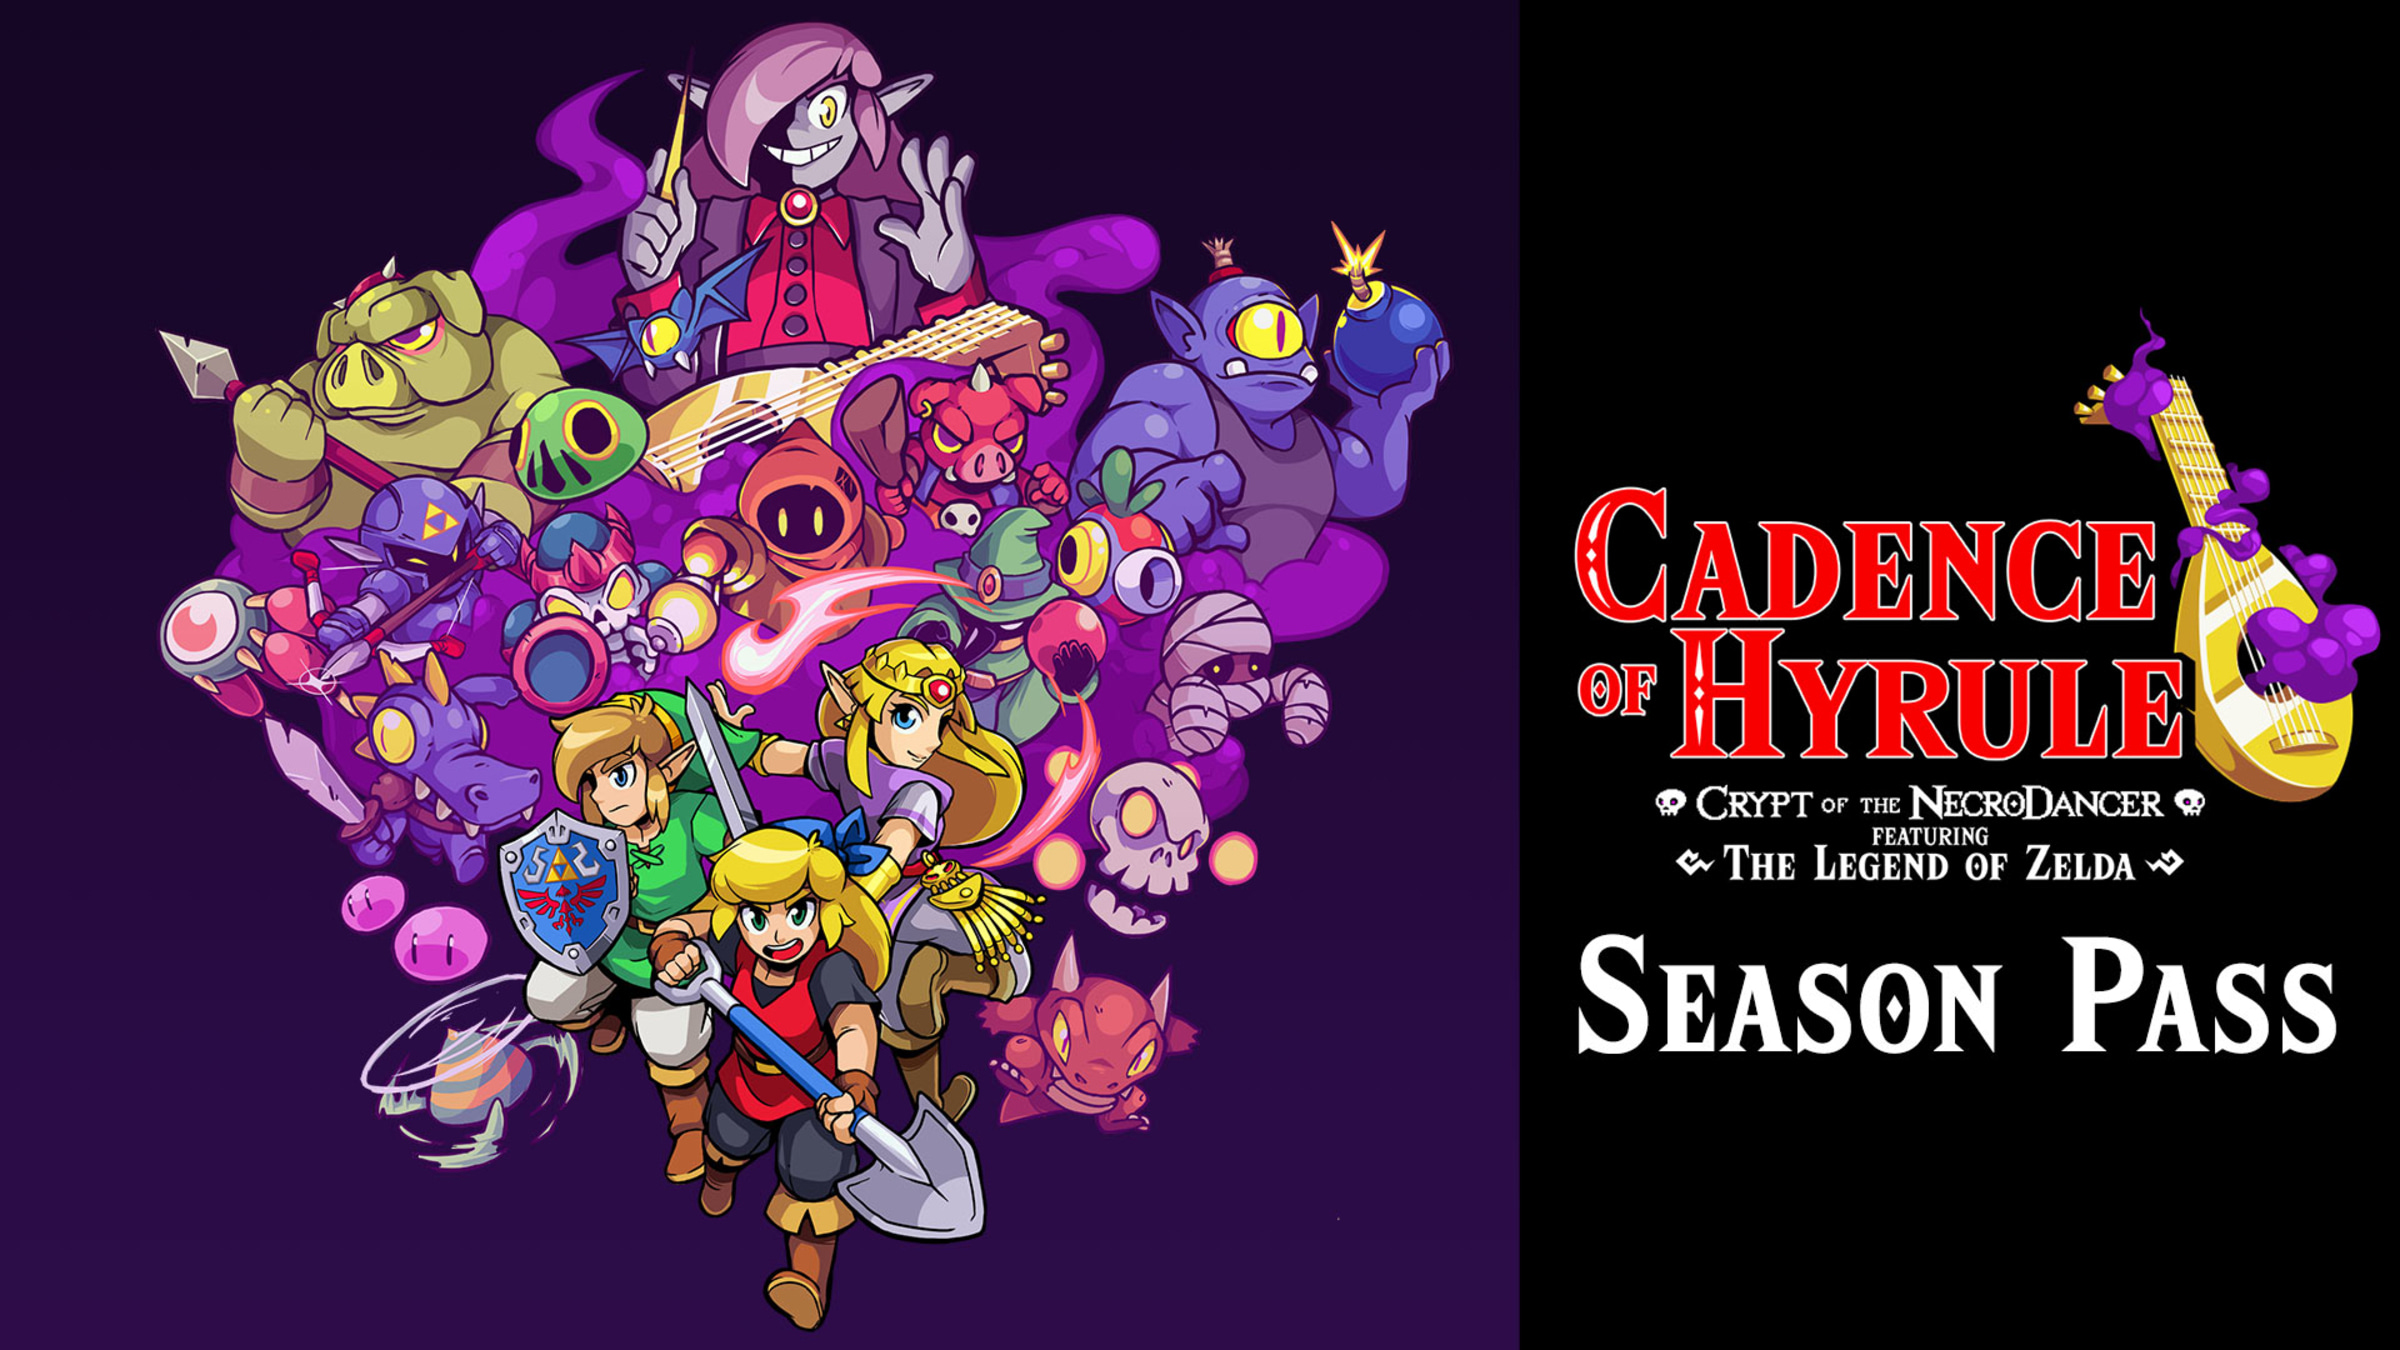 Cadence of Hyrule Season Pass for Nintendo Switch - Nintendo Official Site